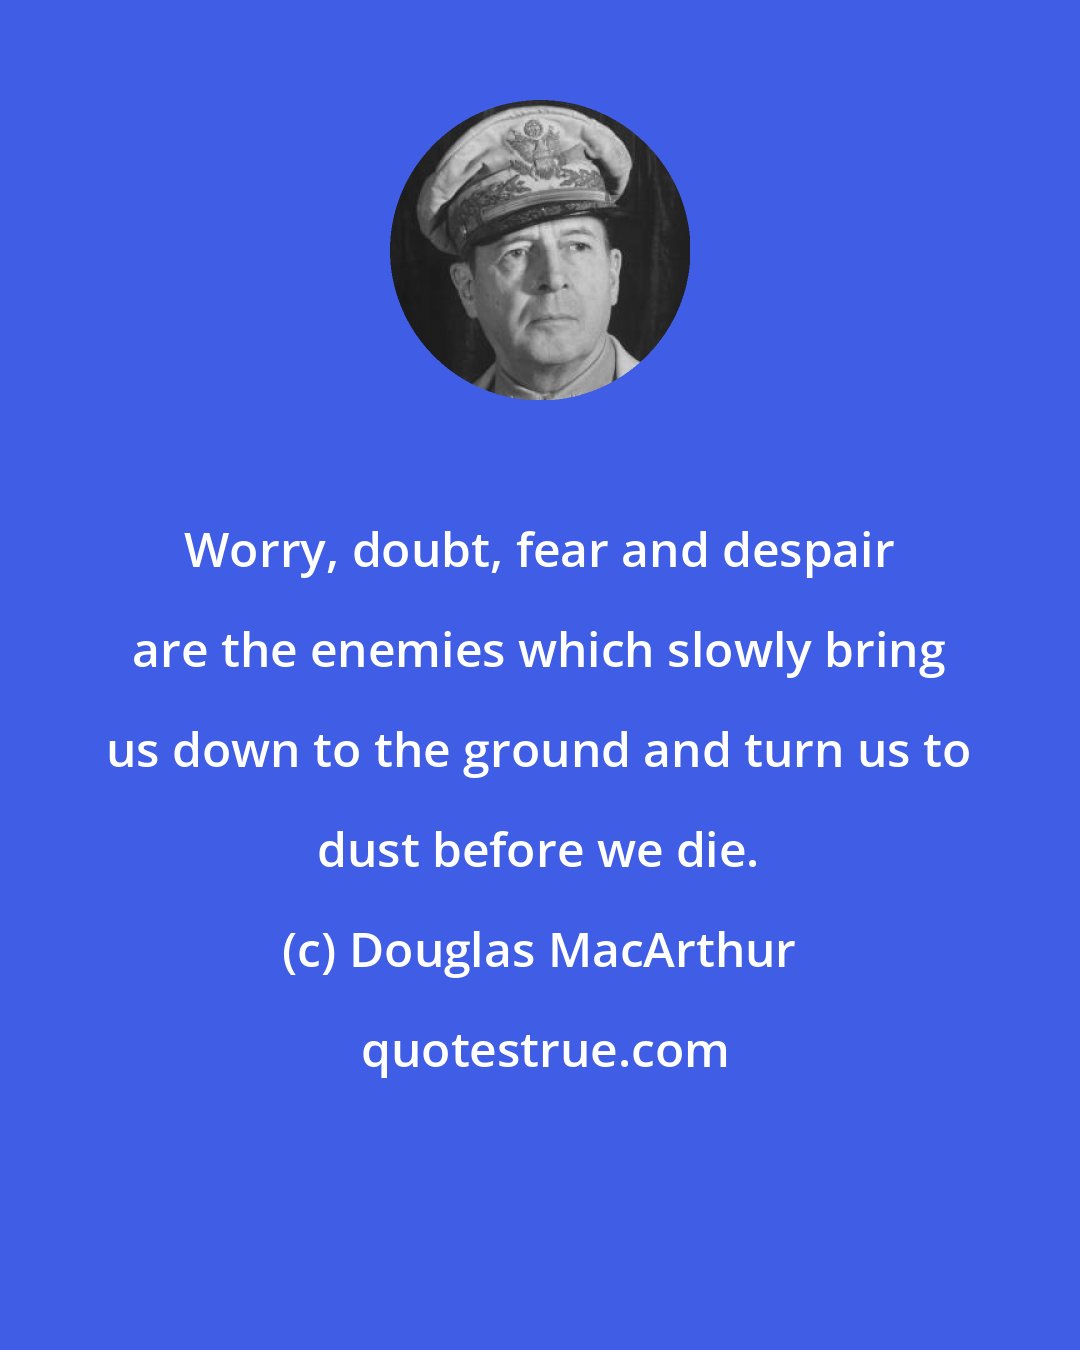 Douglas MacArthur: Worry, doubt, fear and despair are the enemies which slowly bring us down to the ground and turn us to dust before we die.